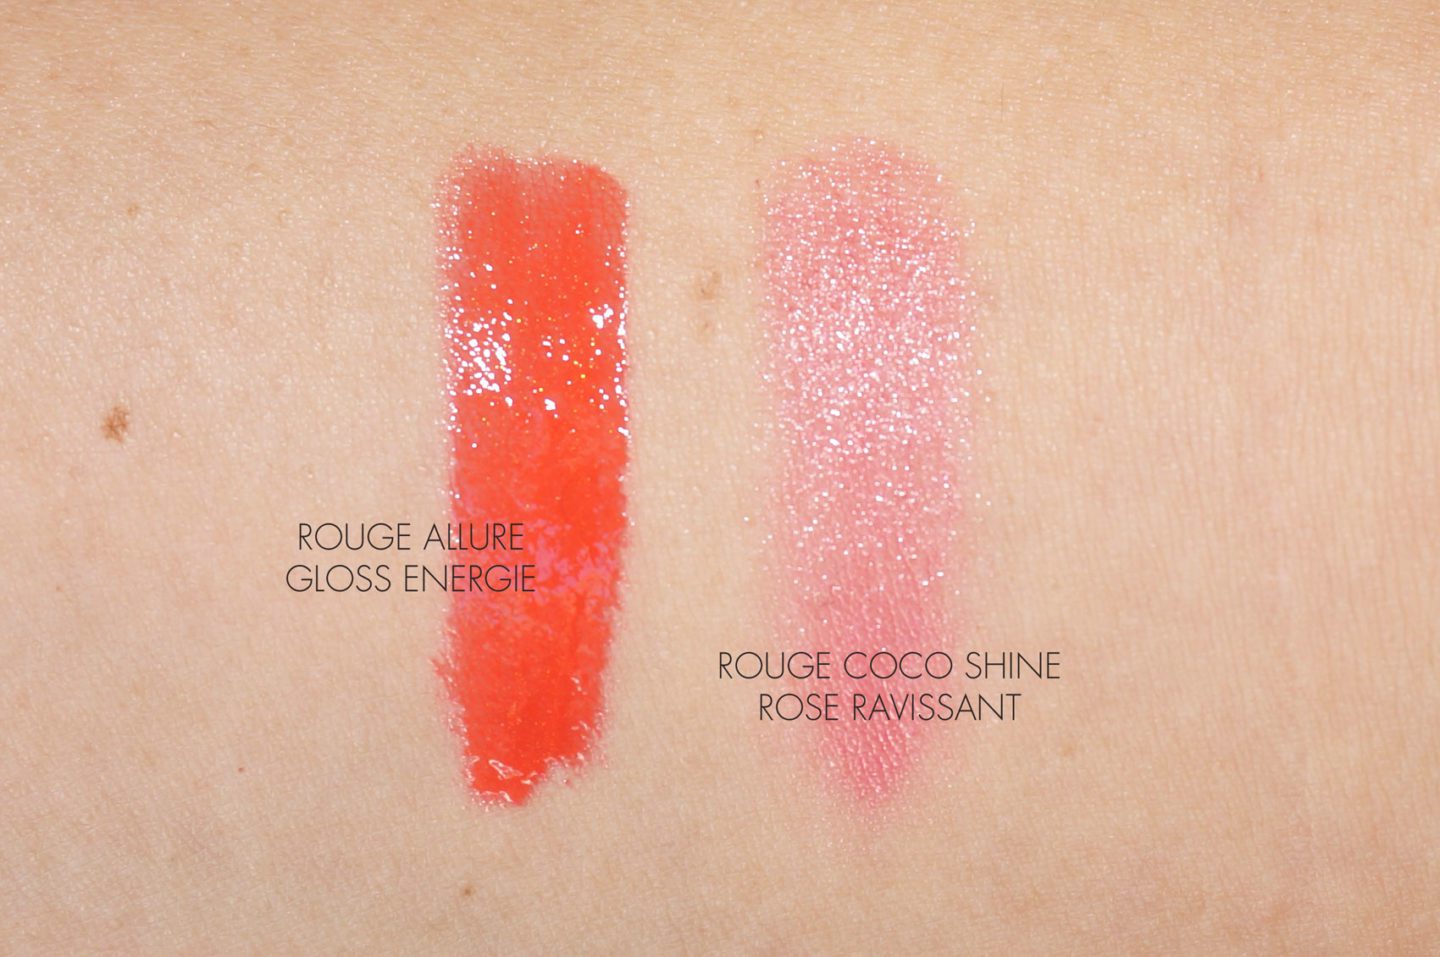 Chanel Rouge Allure Gloss Energie and Rouge Coco Shine Rose Ravissant Swatch | The Beauty Look Book